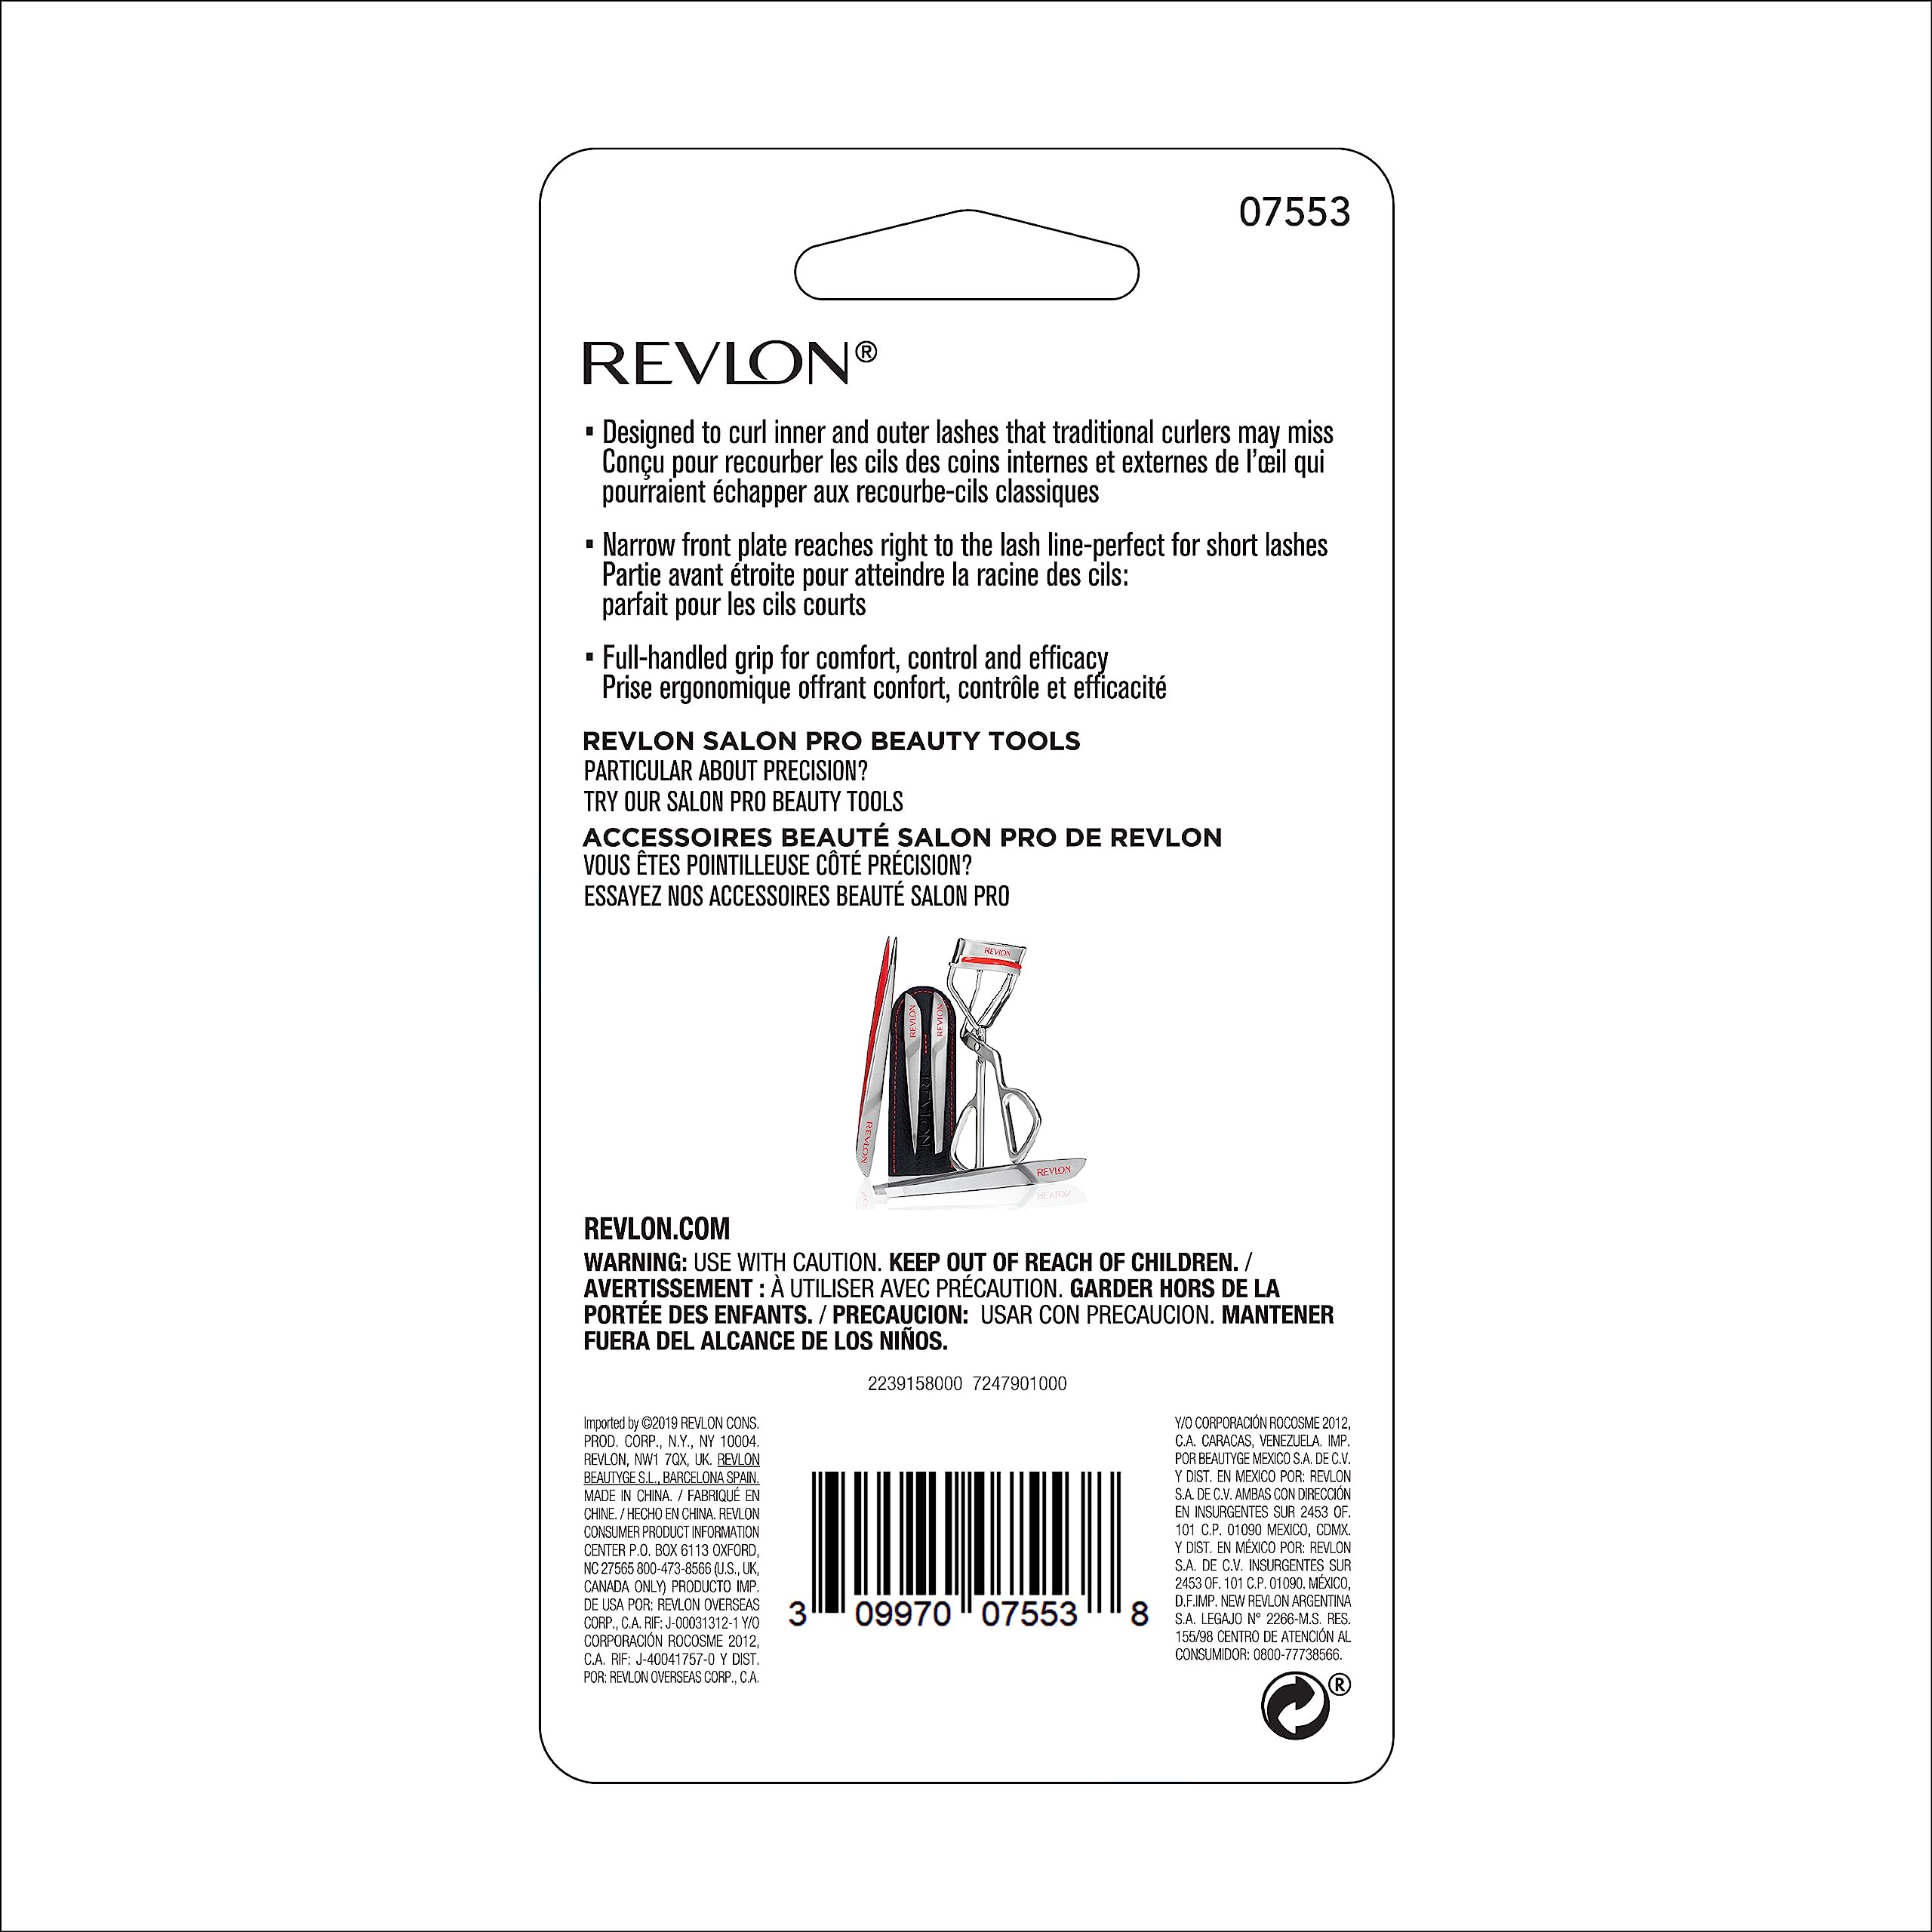 Revlon Eyelash Curler, Precision Curl Control for Short Lashes, Lifts & Defines, Easy to Use (Pack of 1)